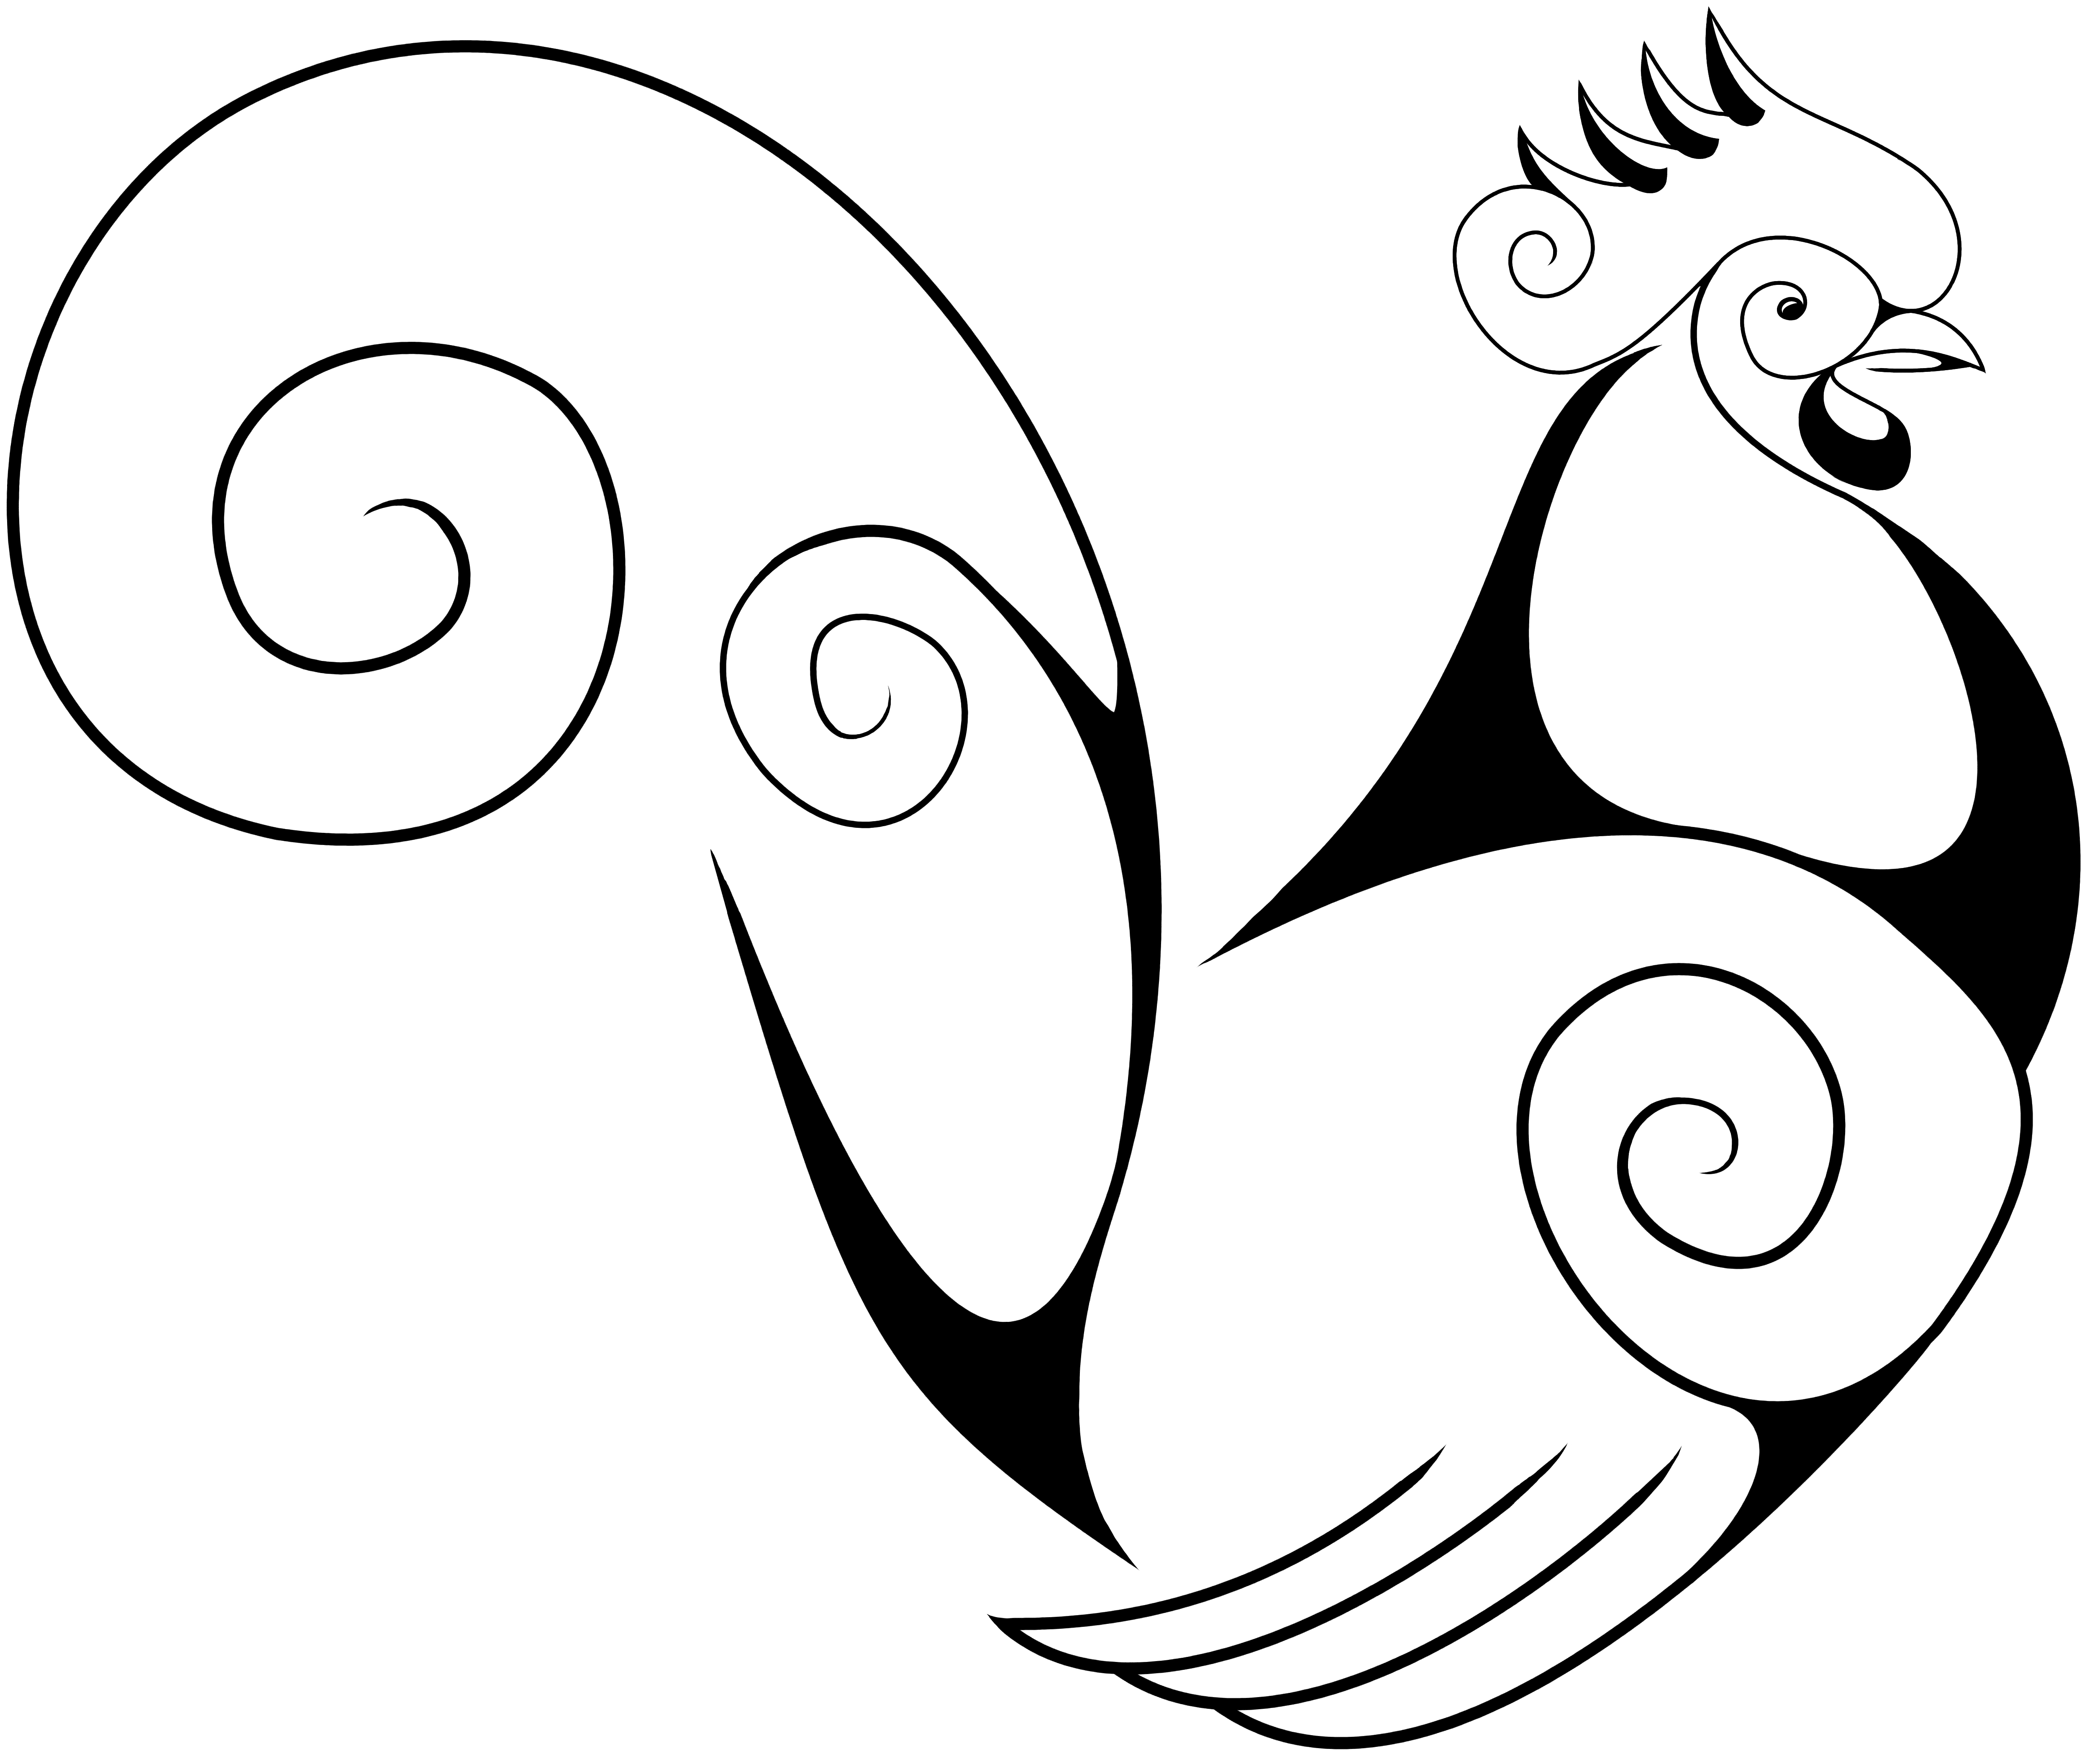 black and white rooster clipart - photo #48